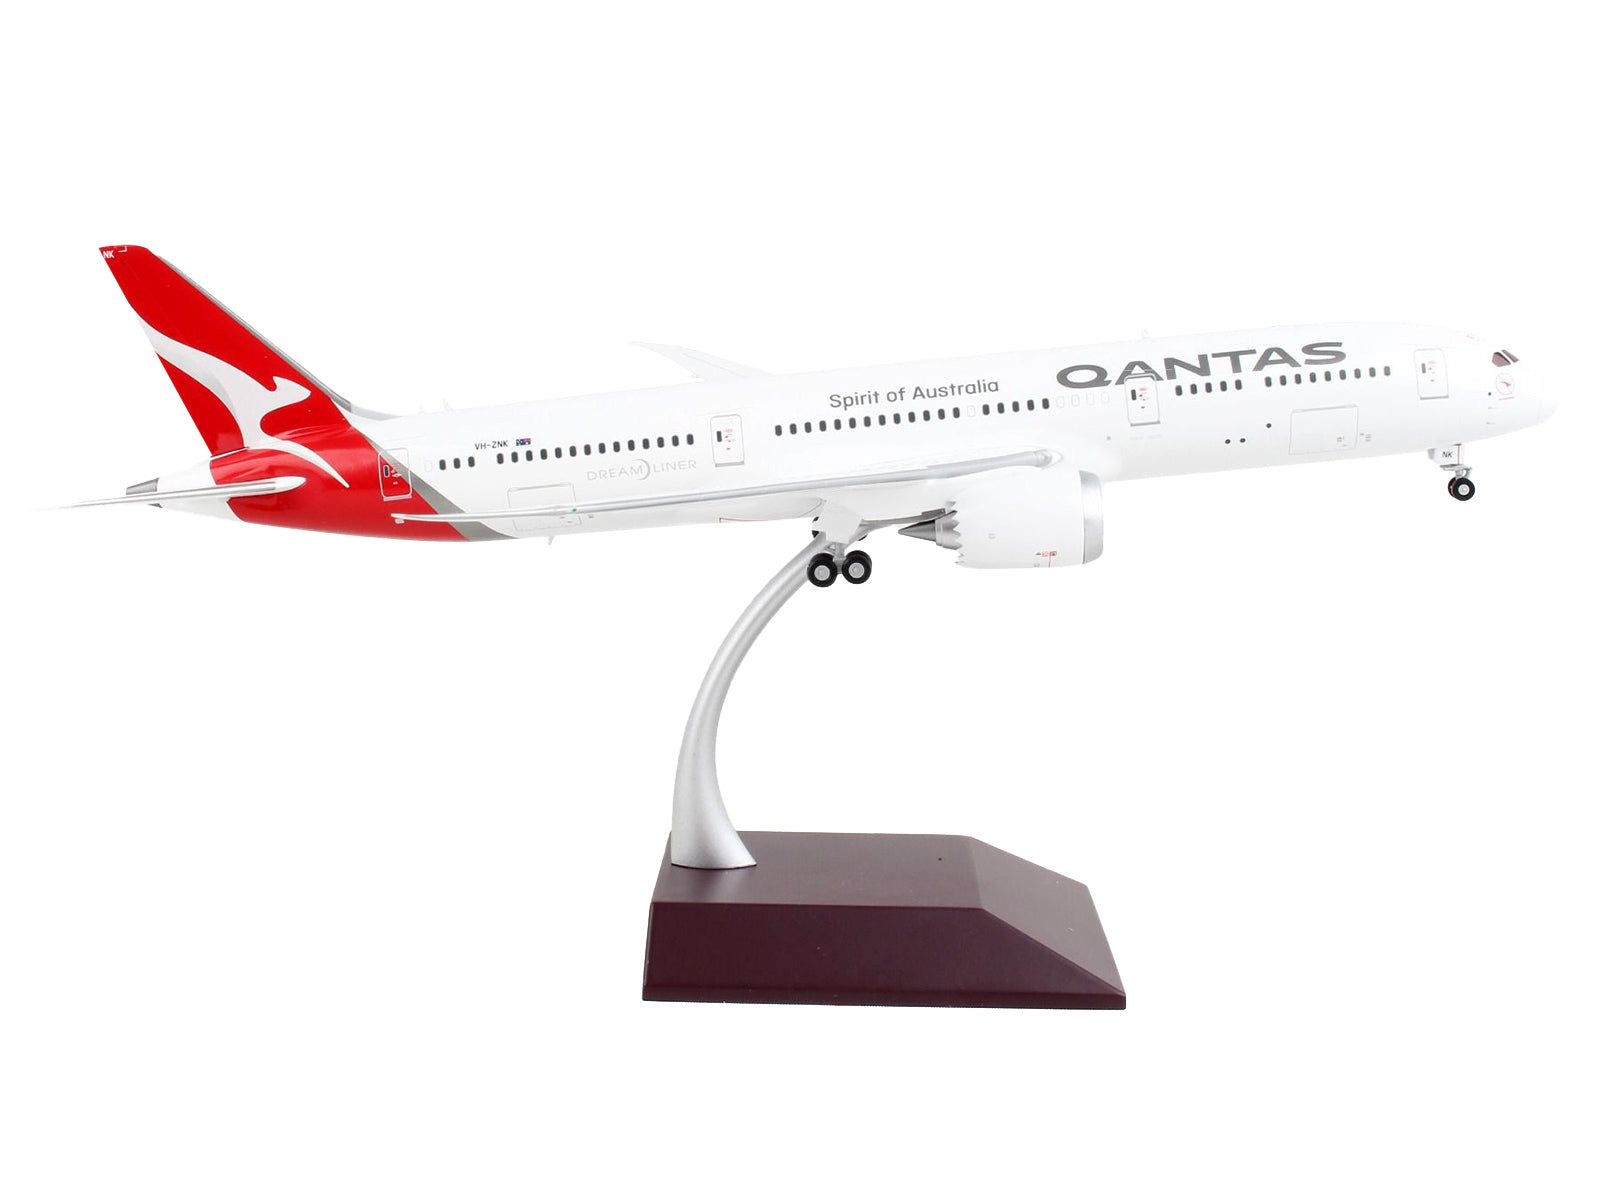 Boeing 787-9 Commercial Aircraft "Qantas Airways - Spirit of Australia" White with Red Tail "Gemini 200" Series 1/200 Diecast Model Airplane by GeminiJets